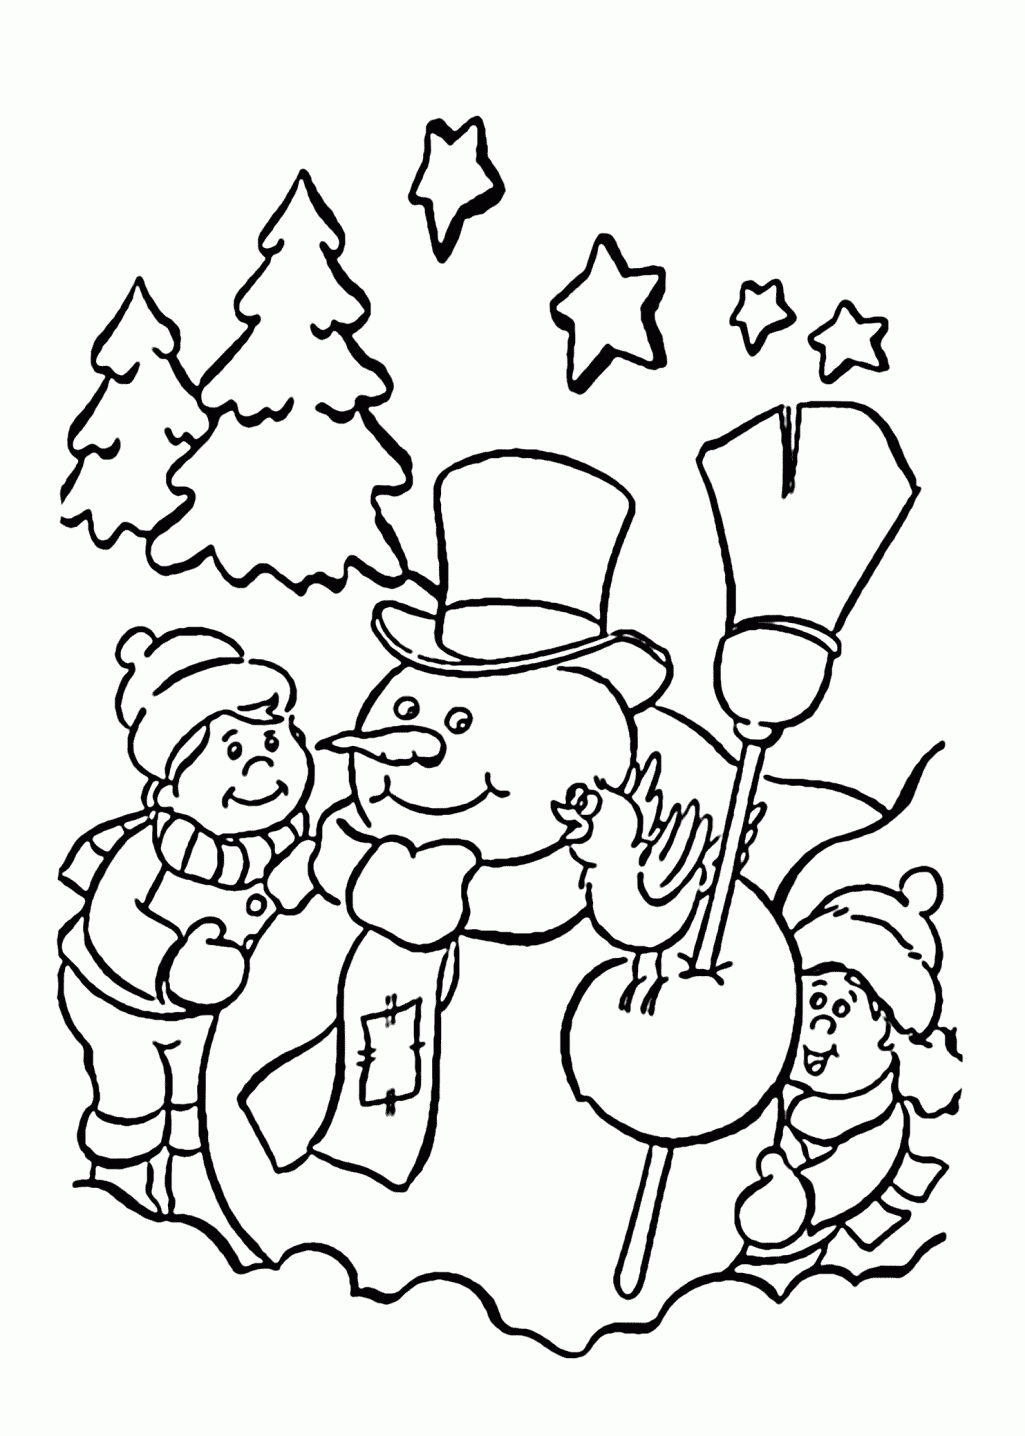 Winter Holiday Coloring Pages For Kids Drawing with Crayons